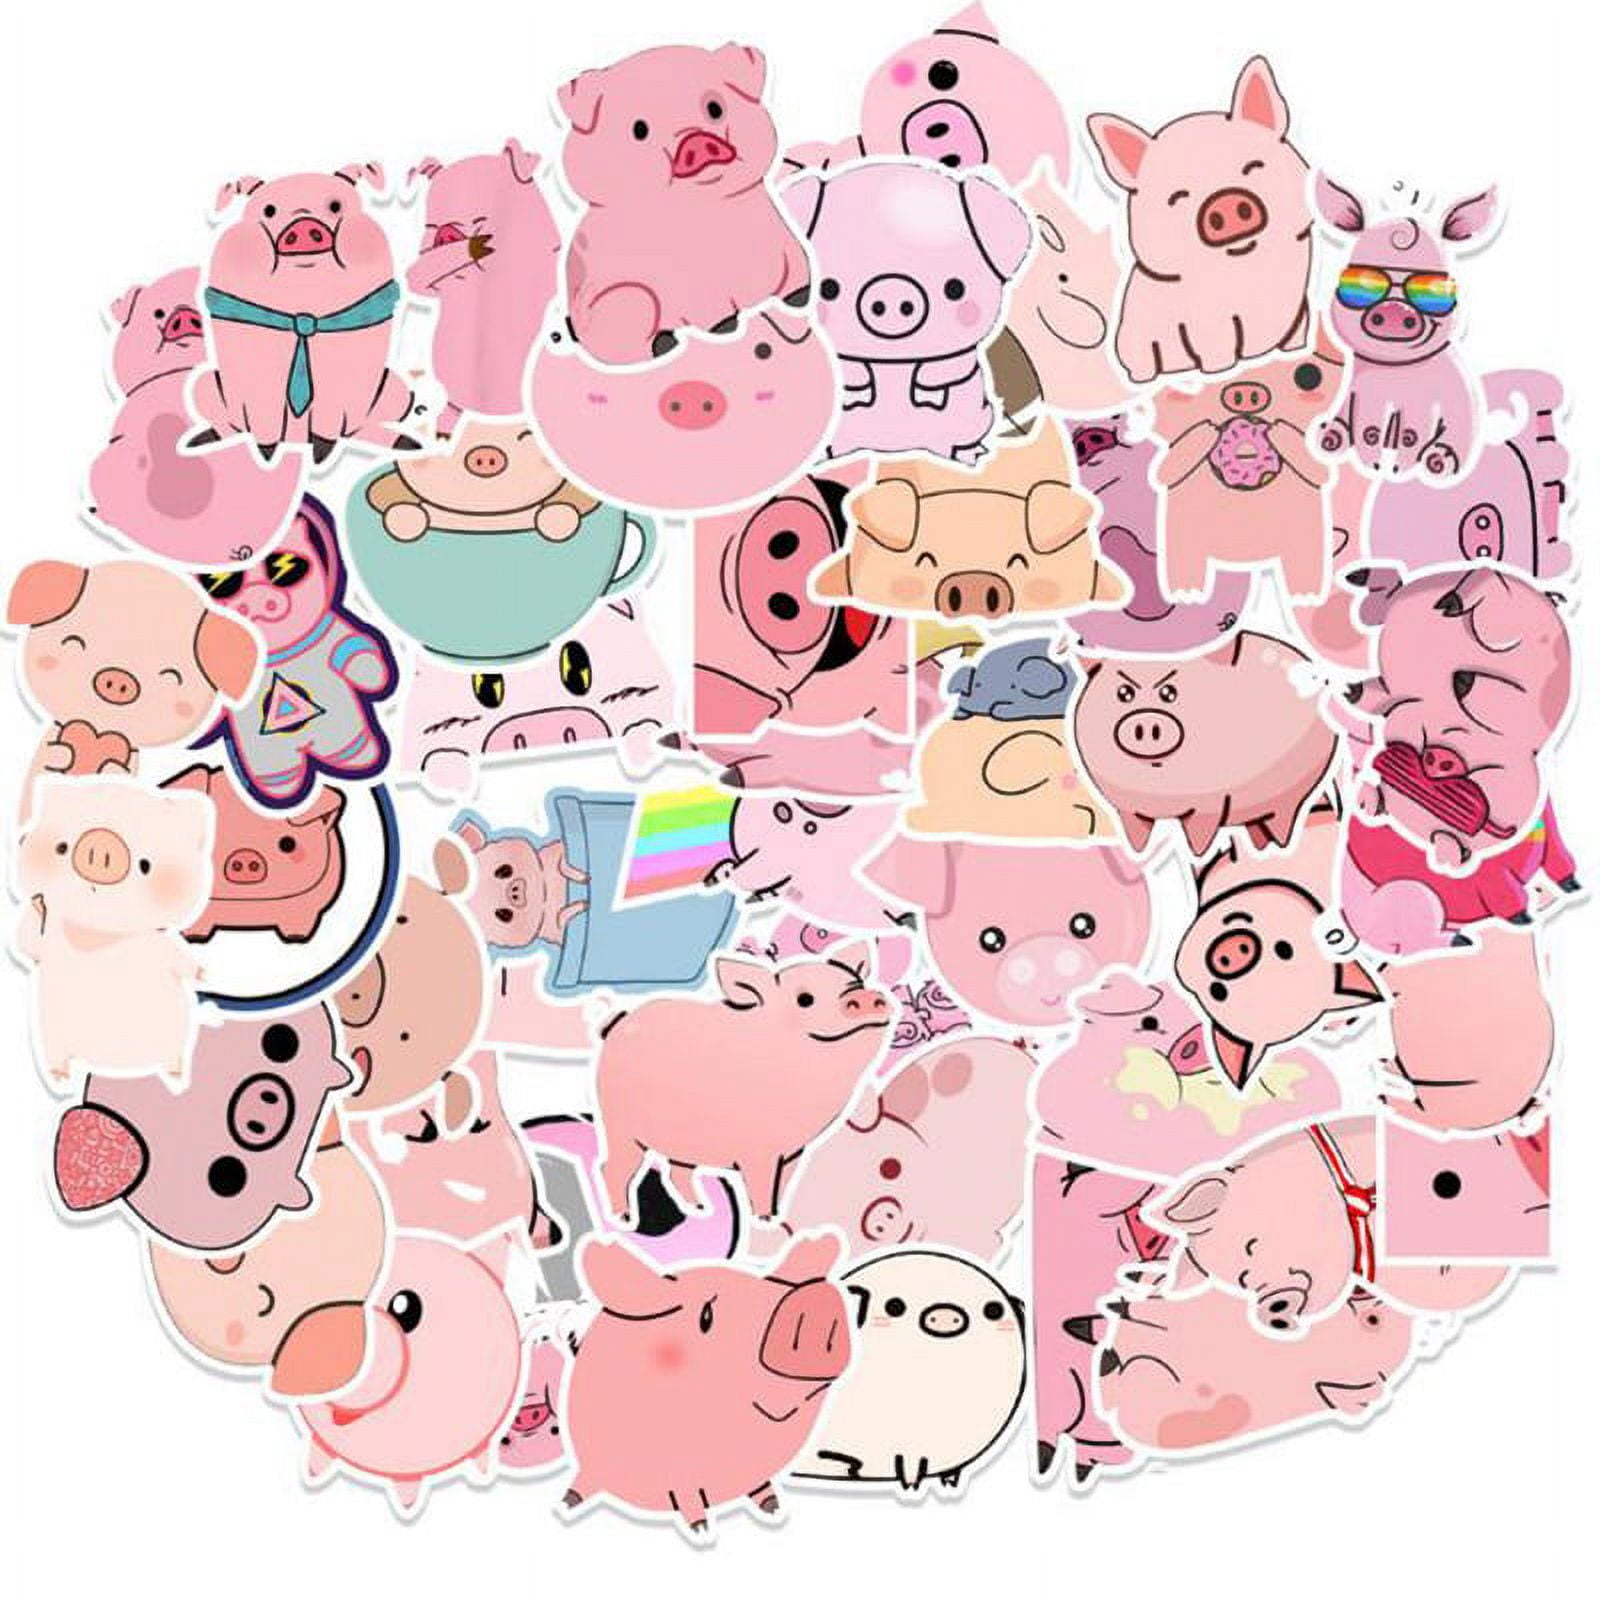  NG2D58 50pcs Piggy Stickers Cool Video Game Stickers Vinyl  Waterproof Stickers for Kids Teens 2-4inch Piggy 50pcs 0 : Toys & Games